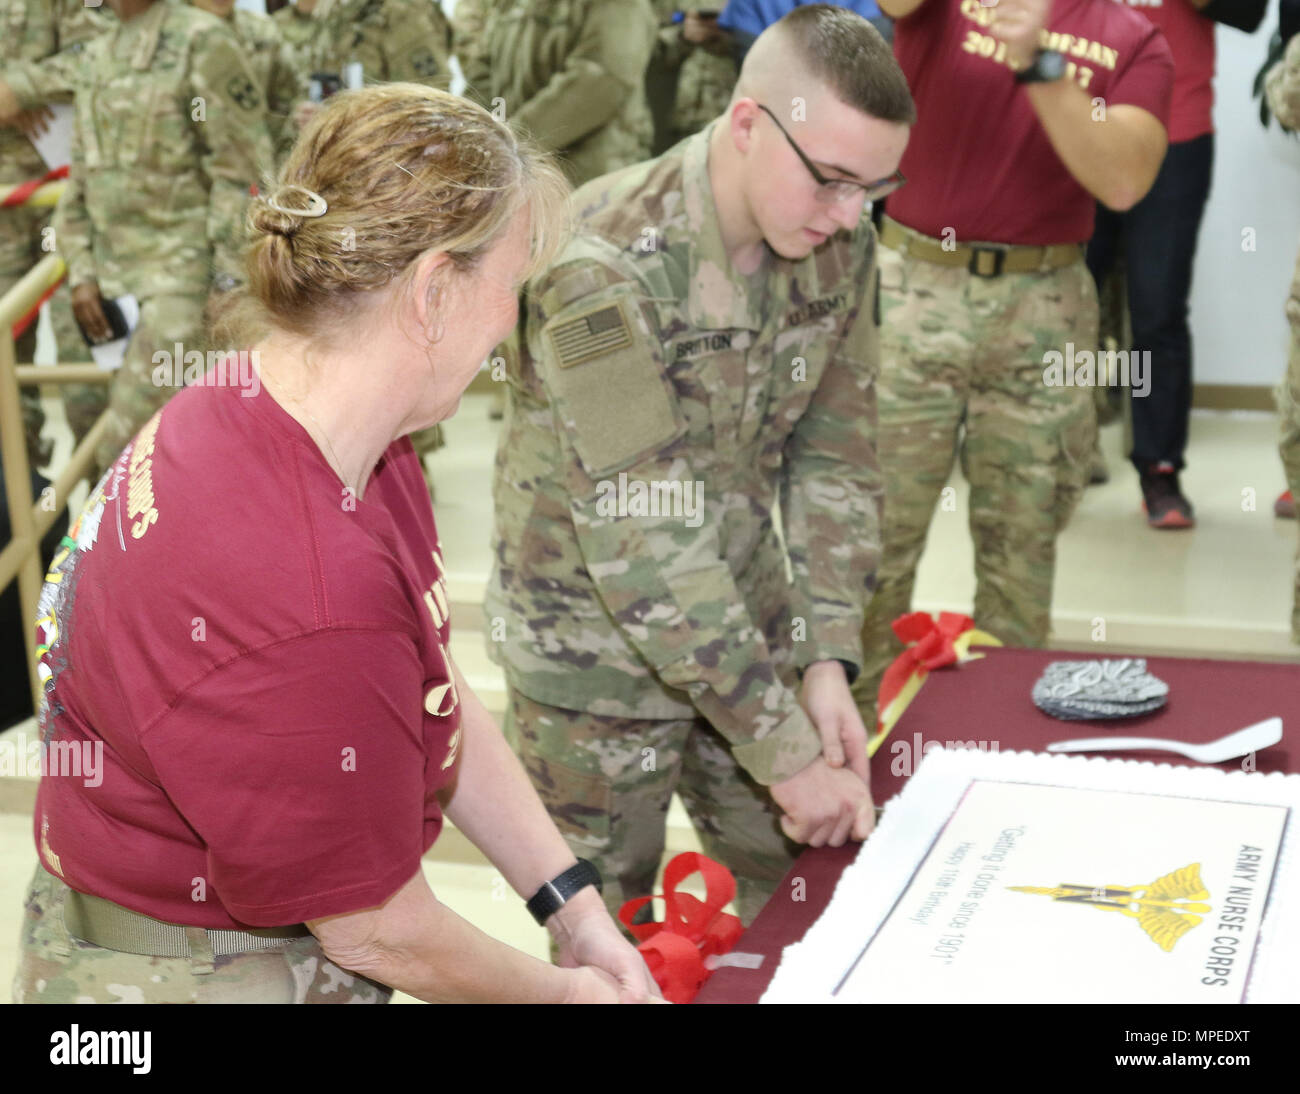 CAMP ARIFJAN, Kuwait -- Col. Belinda Spencer (left), critical care nurse, and Pfc. Richard Britton (center), a combat medic, both with the 31st Combat Support Hospital, cut the birthday cake honoring the 116th Army Nurse Corp birthday at Camp Arifjan, Kuwait, Feb. 2, 2017. (U.S. Army photo by Sgt. Tom Wade, USARCENT PAO) Stock Photo